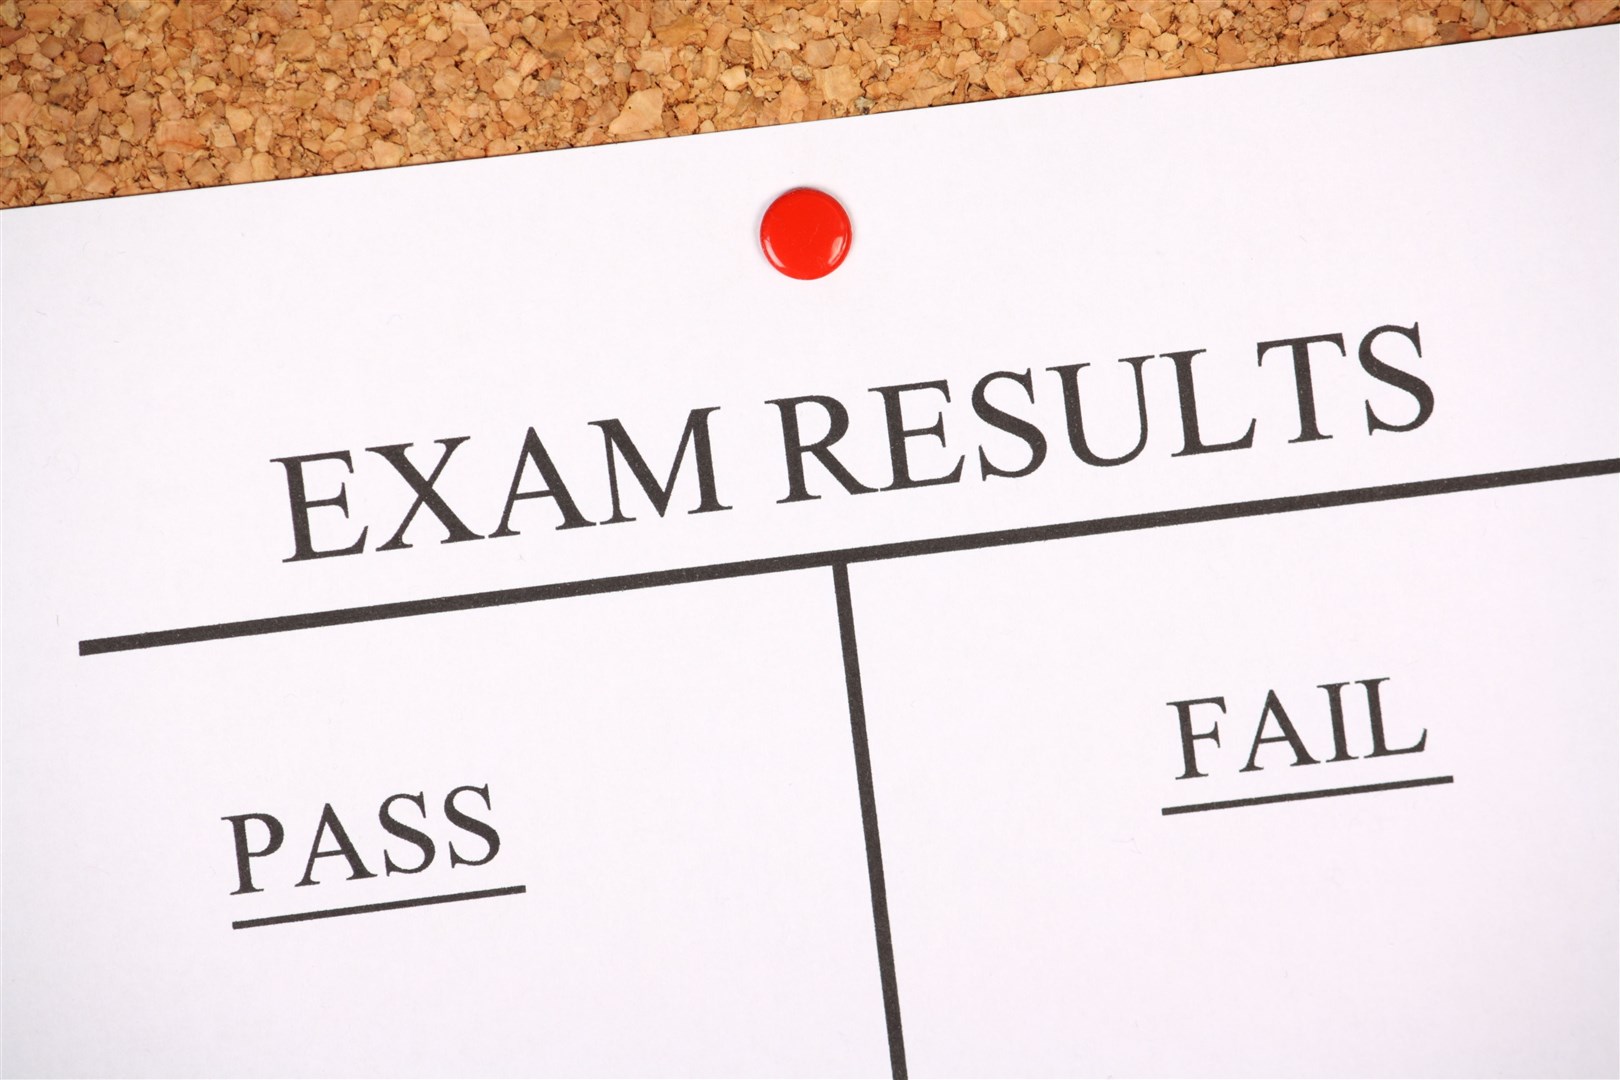 Scottish pupils did not sit exams this year but depended on coursework and teacher estimates for their results.